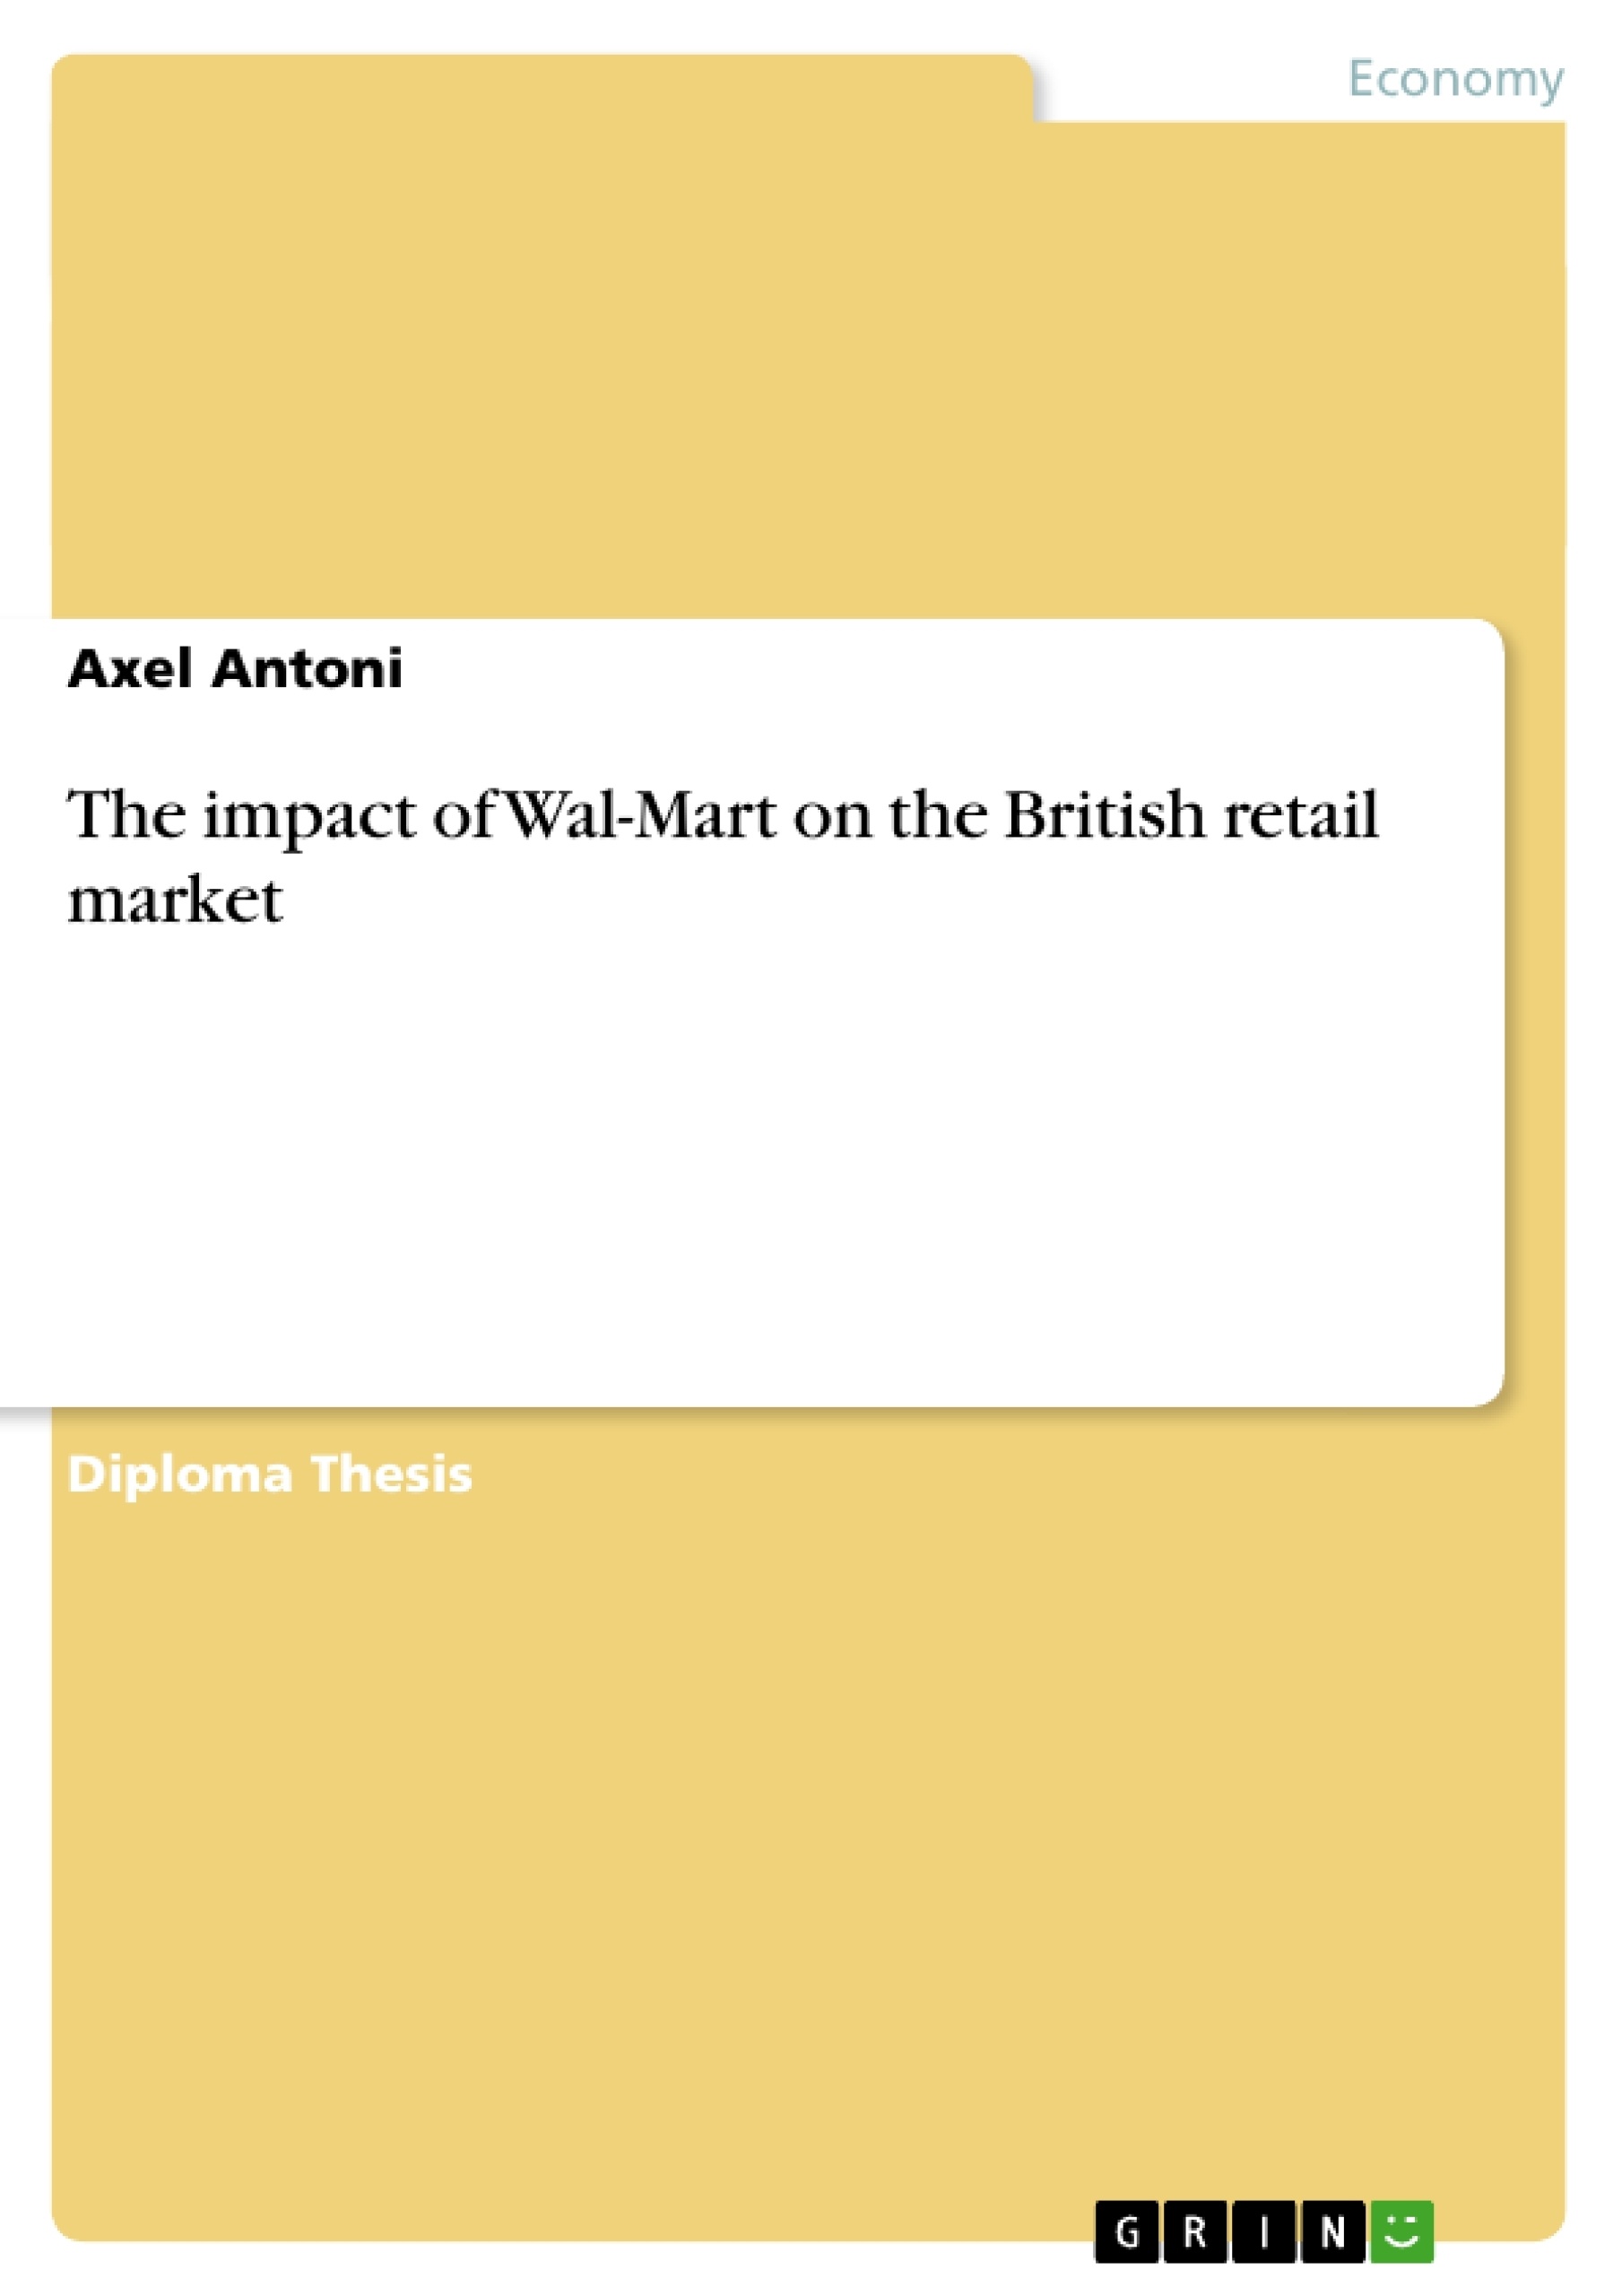 Title: The impact of Wal-Mart on the British retail market